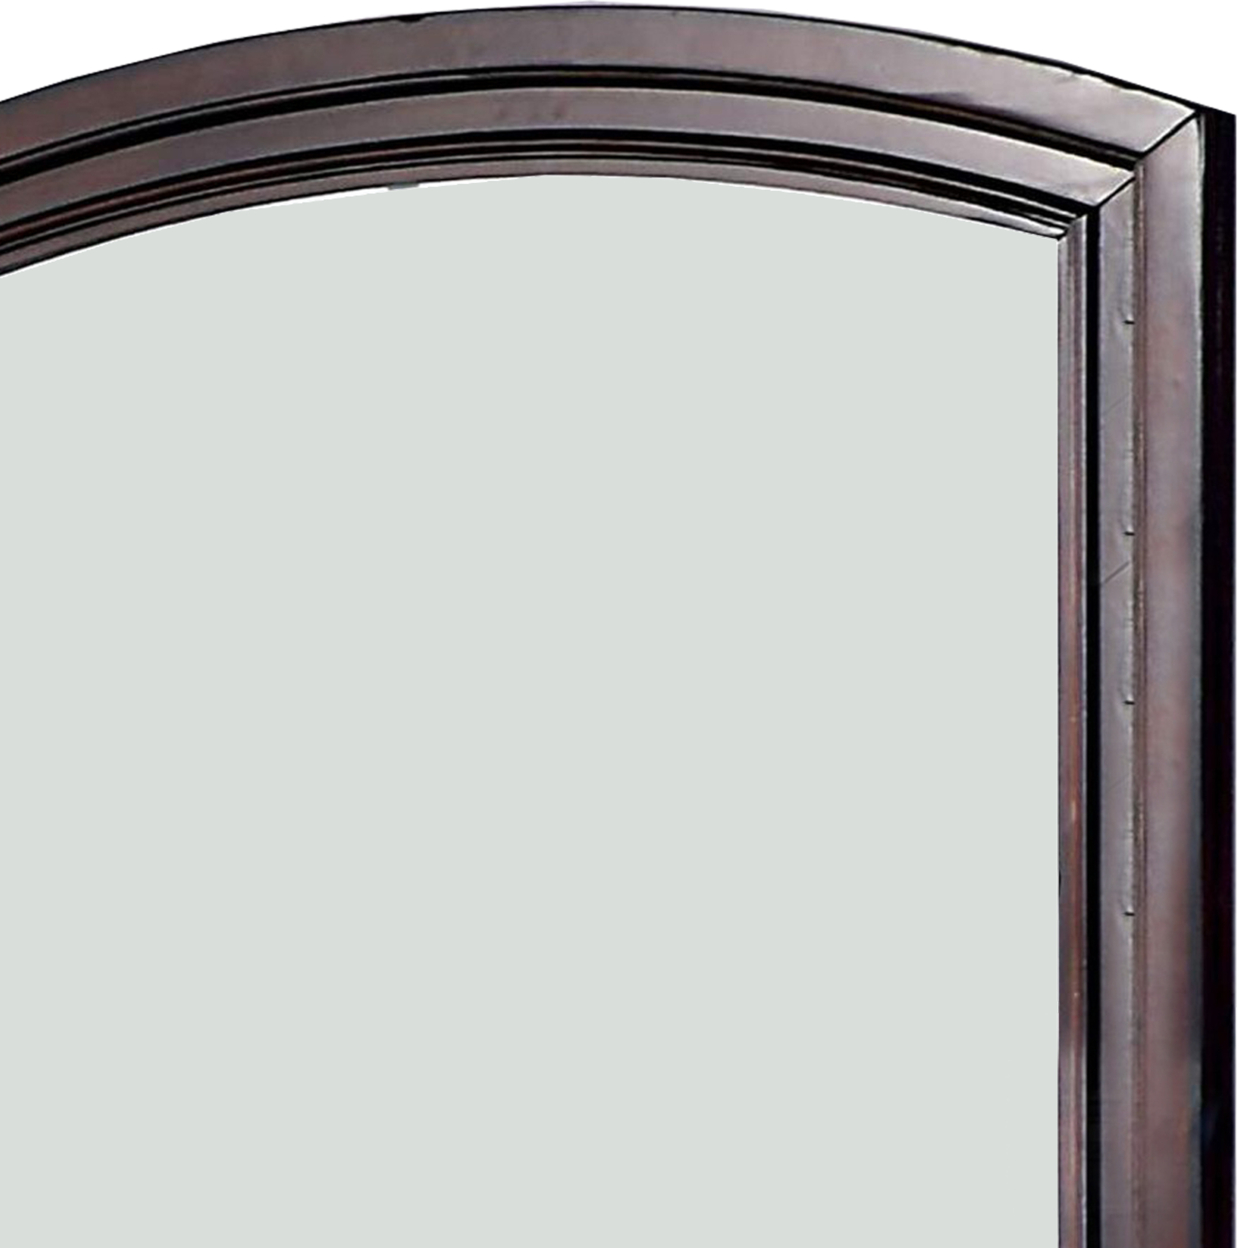 Mirror With Curved Top Wooden Frame, Cherry Brown- Saltoro Sherpi